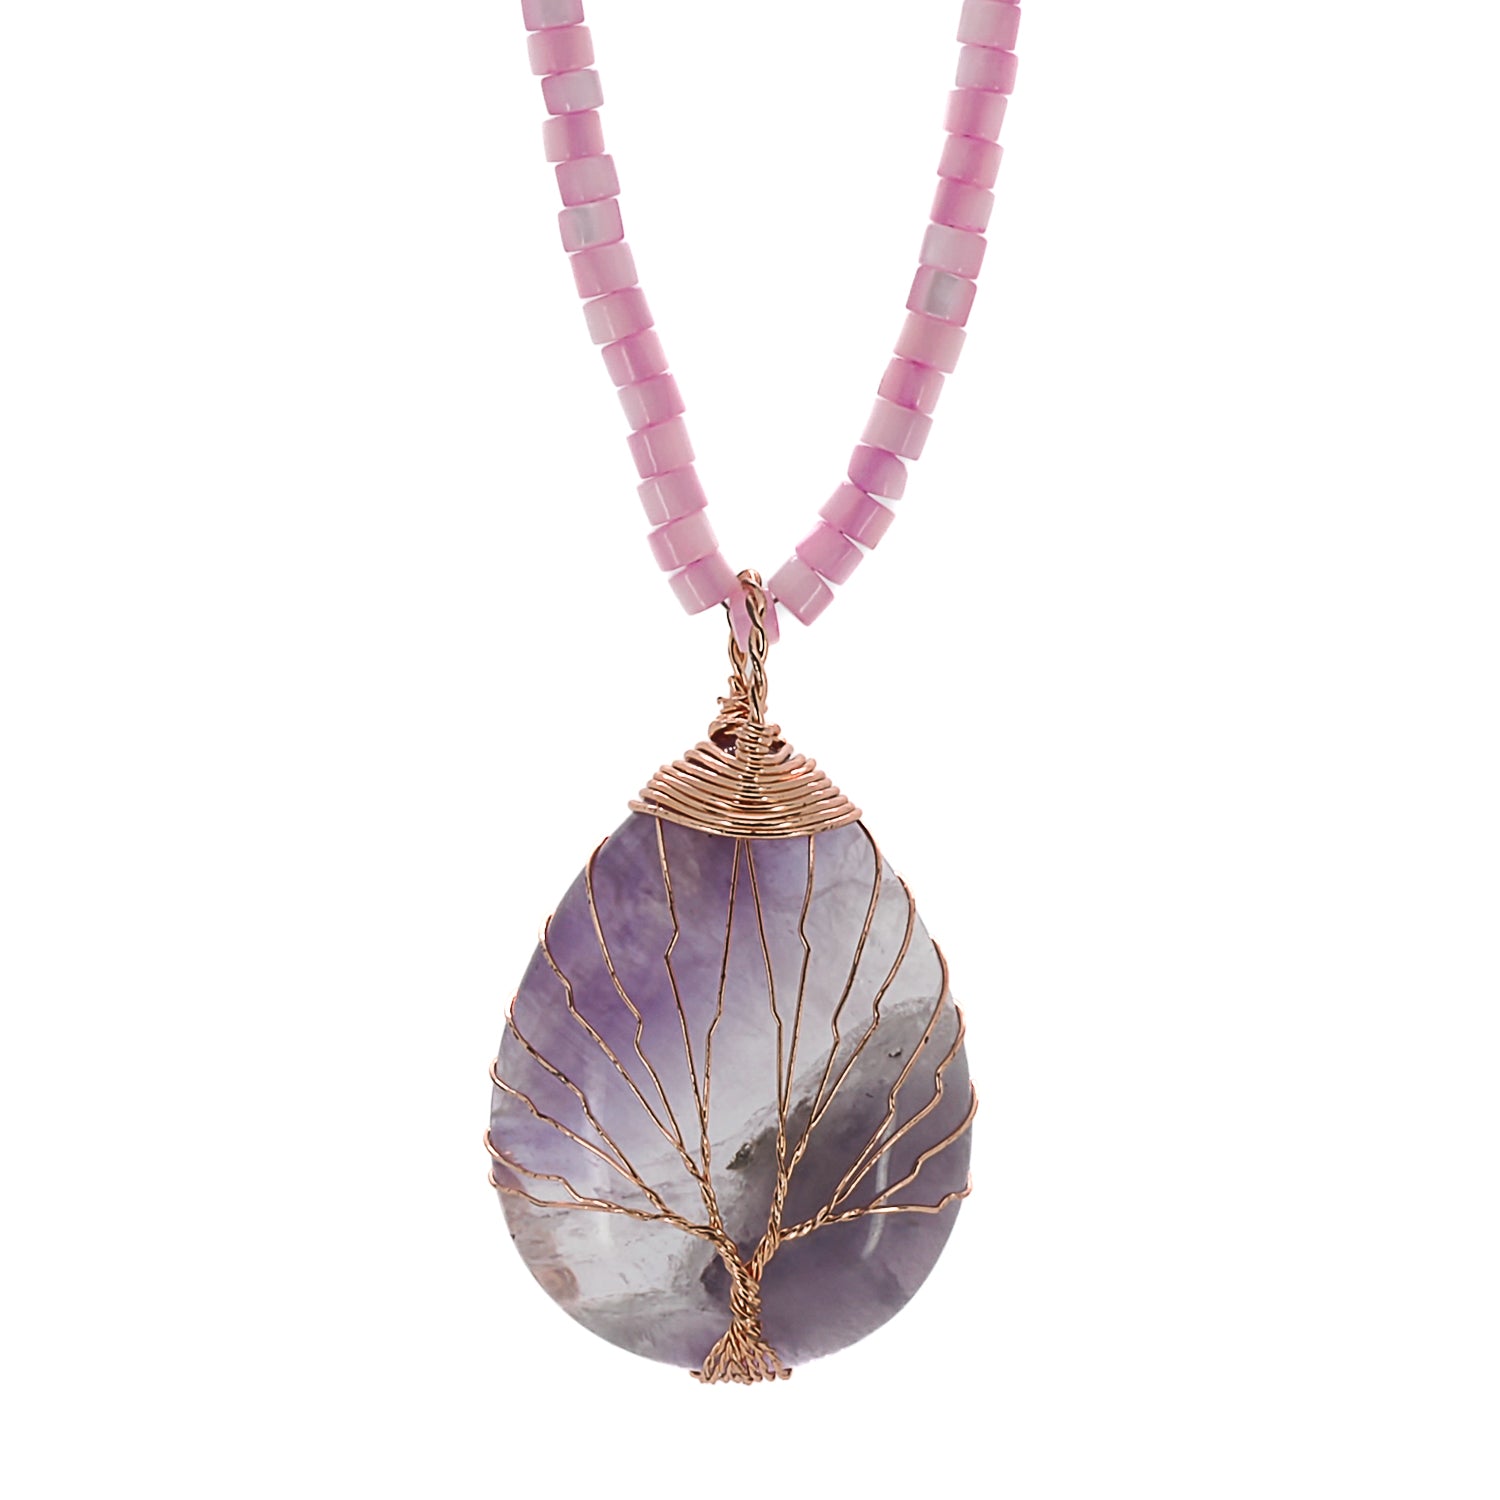 Discover the beauty and healing energy of the Amethyst Healing Tree Necklace, featuring a stunning tree-shaped pendant made from natural amethyst gemstones.